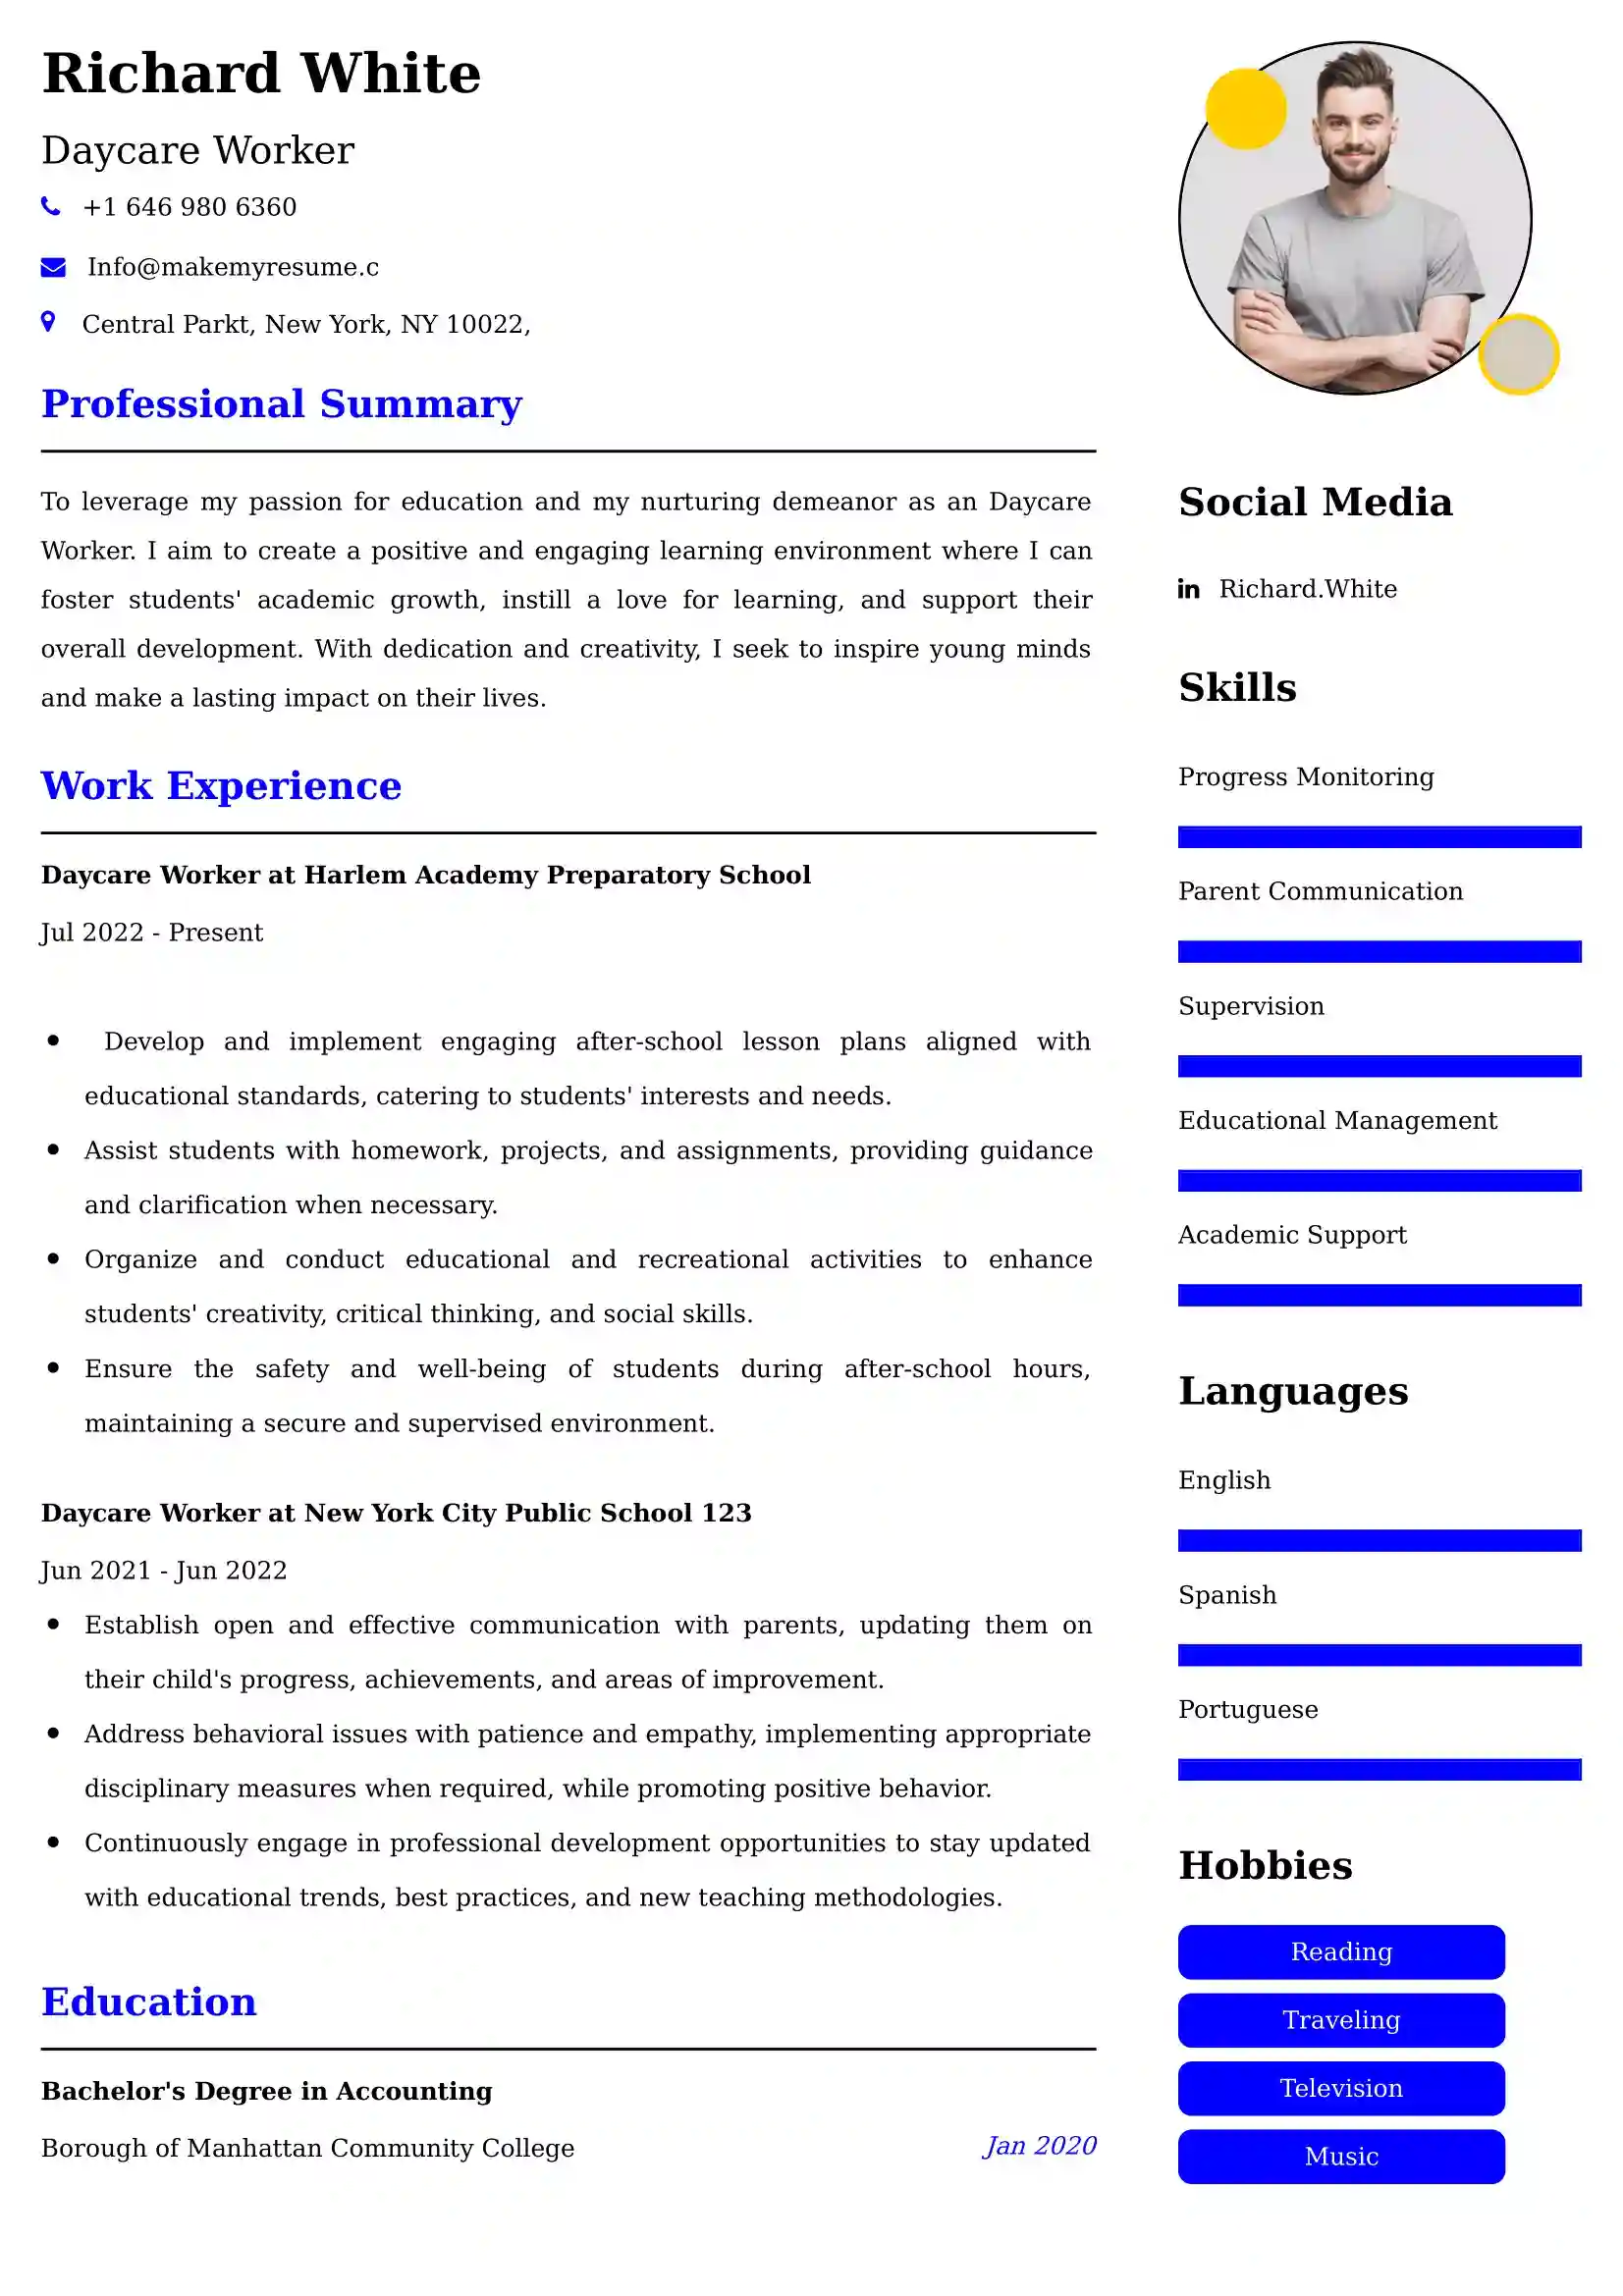 Daycare Worker Resume Examples - Brazilian Format, Latest Template